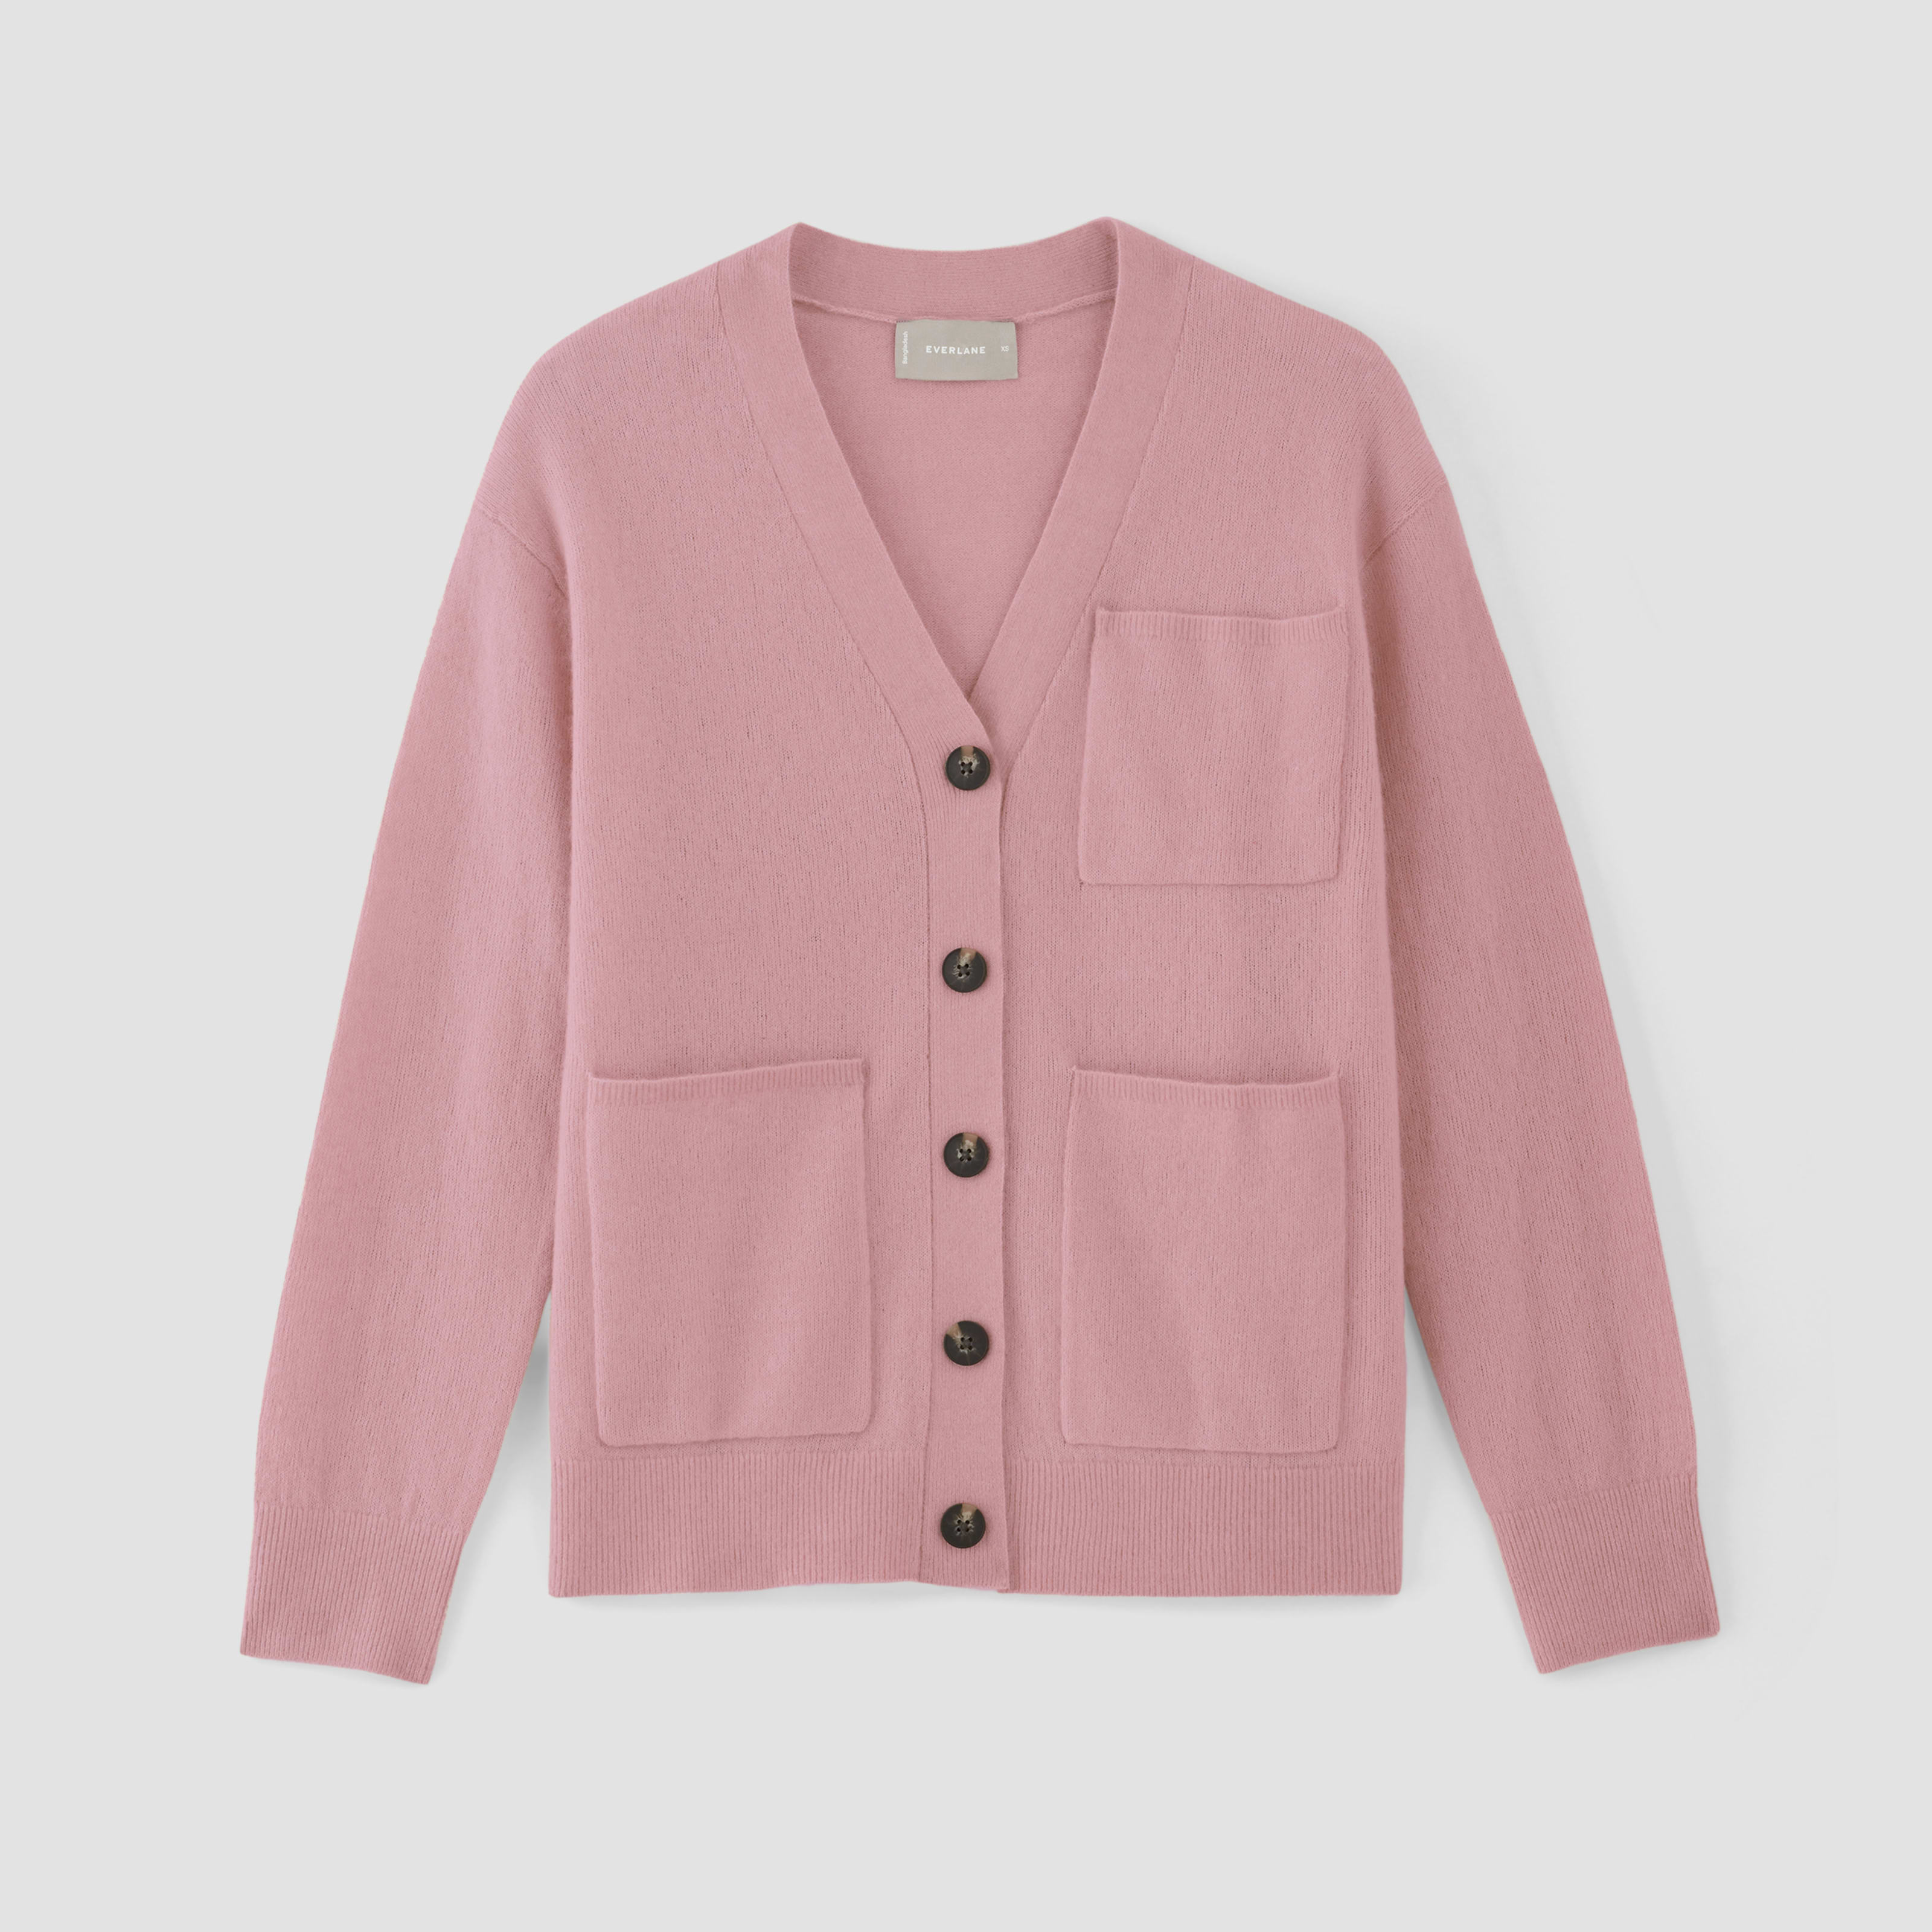 women's cozy-stretch relaxed cardigan by everlane in pink peony, size xxs